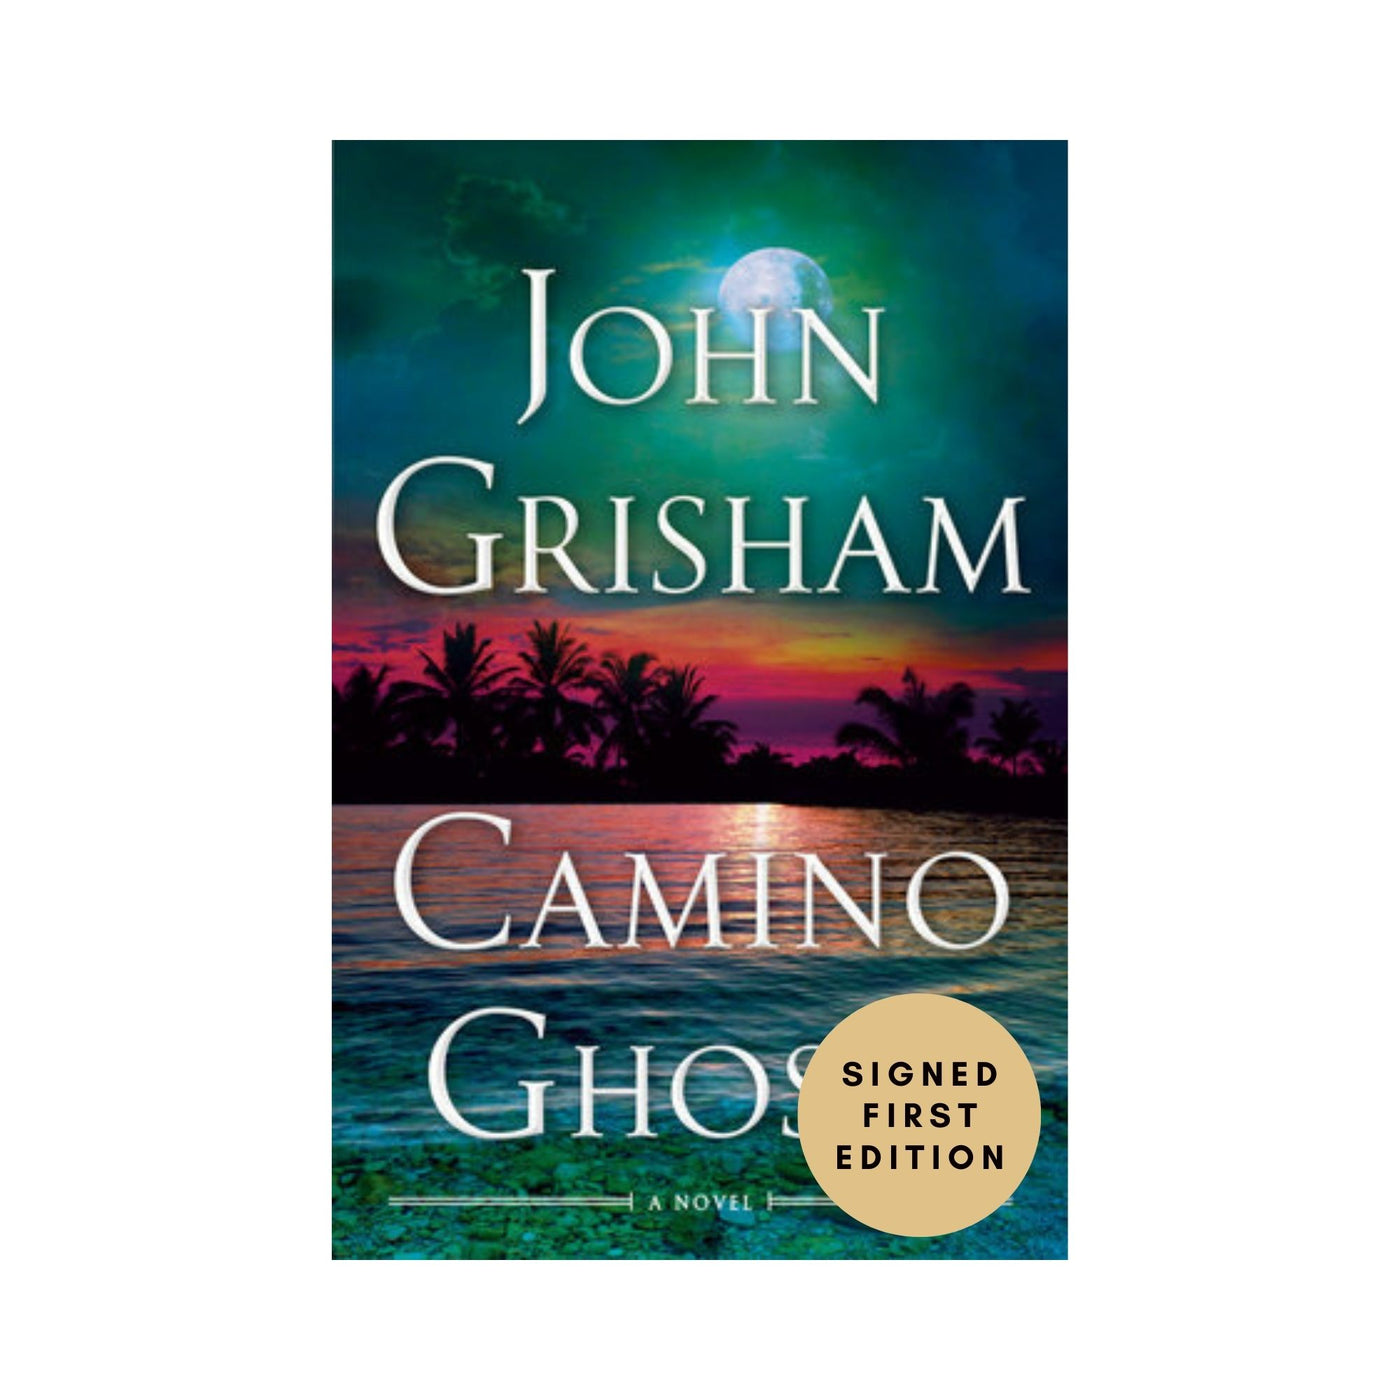 Camino Ghosts by John Grisham (Signed Copy) (Preorder)